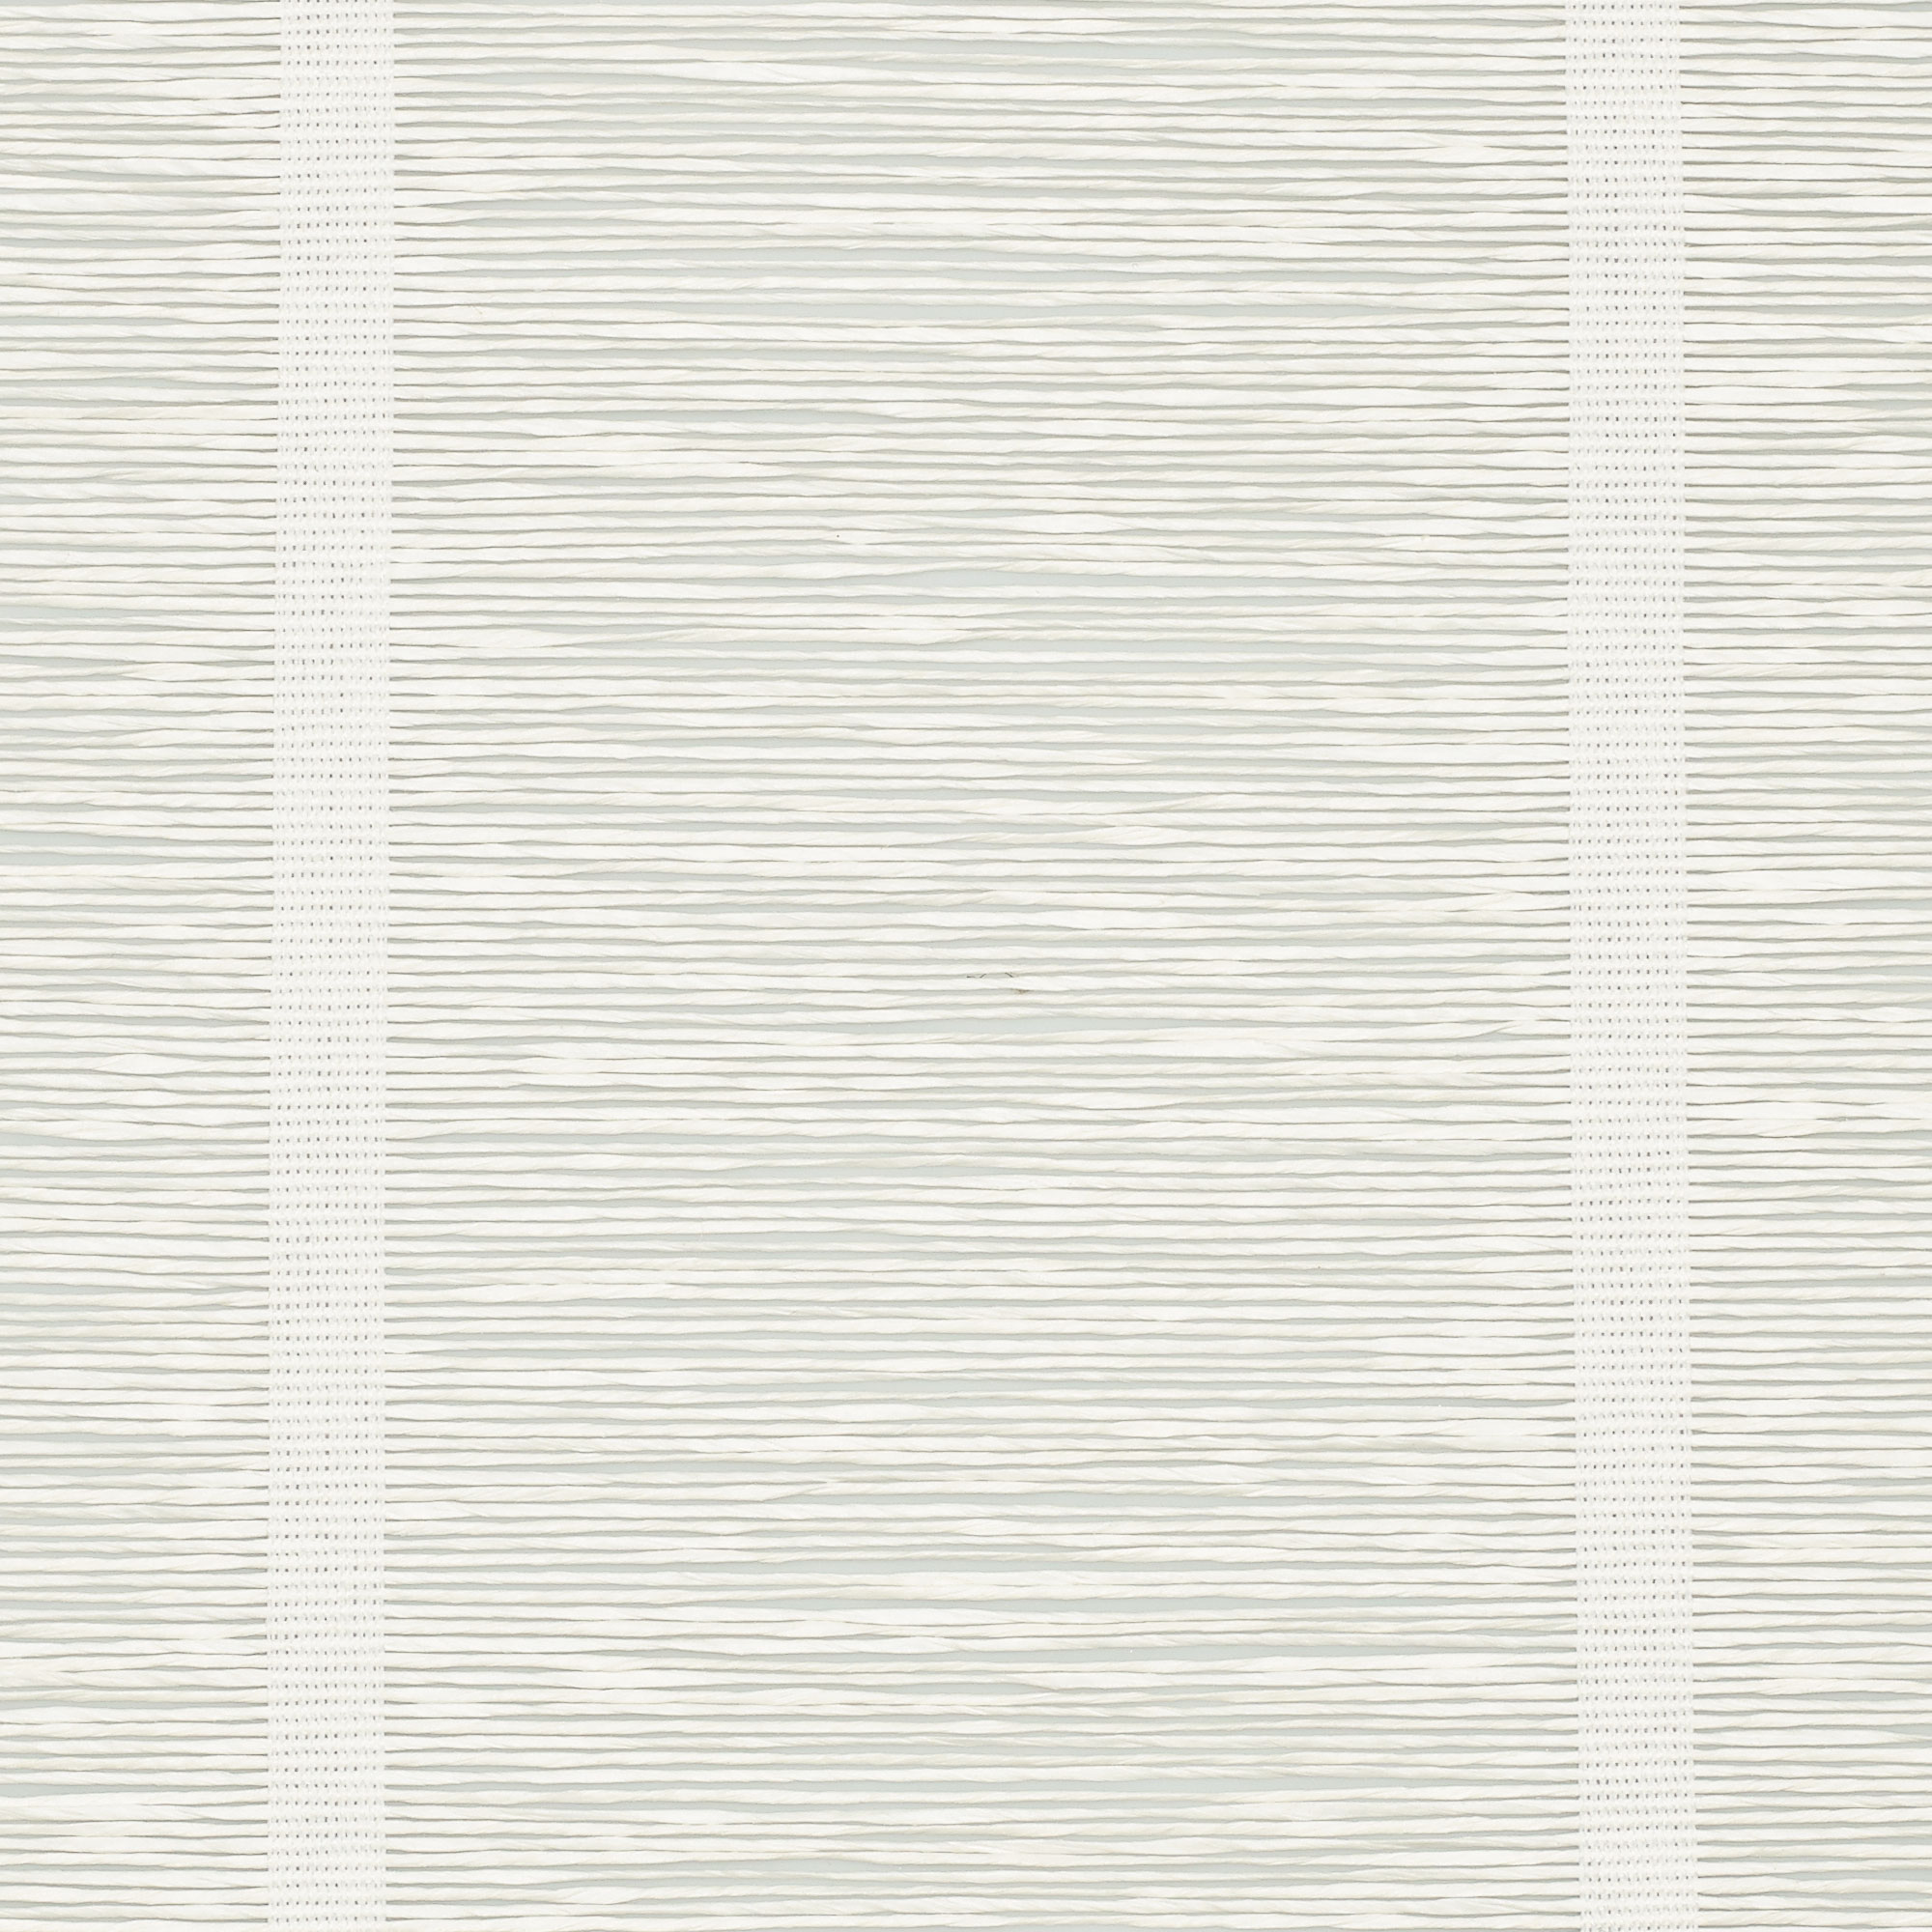 swatch-PW158-03-basketry-blanched-web.jpg